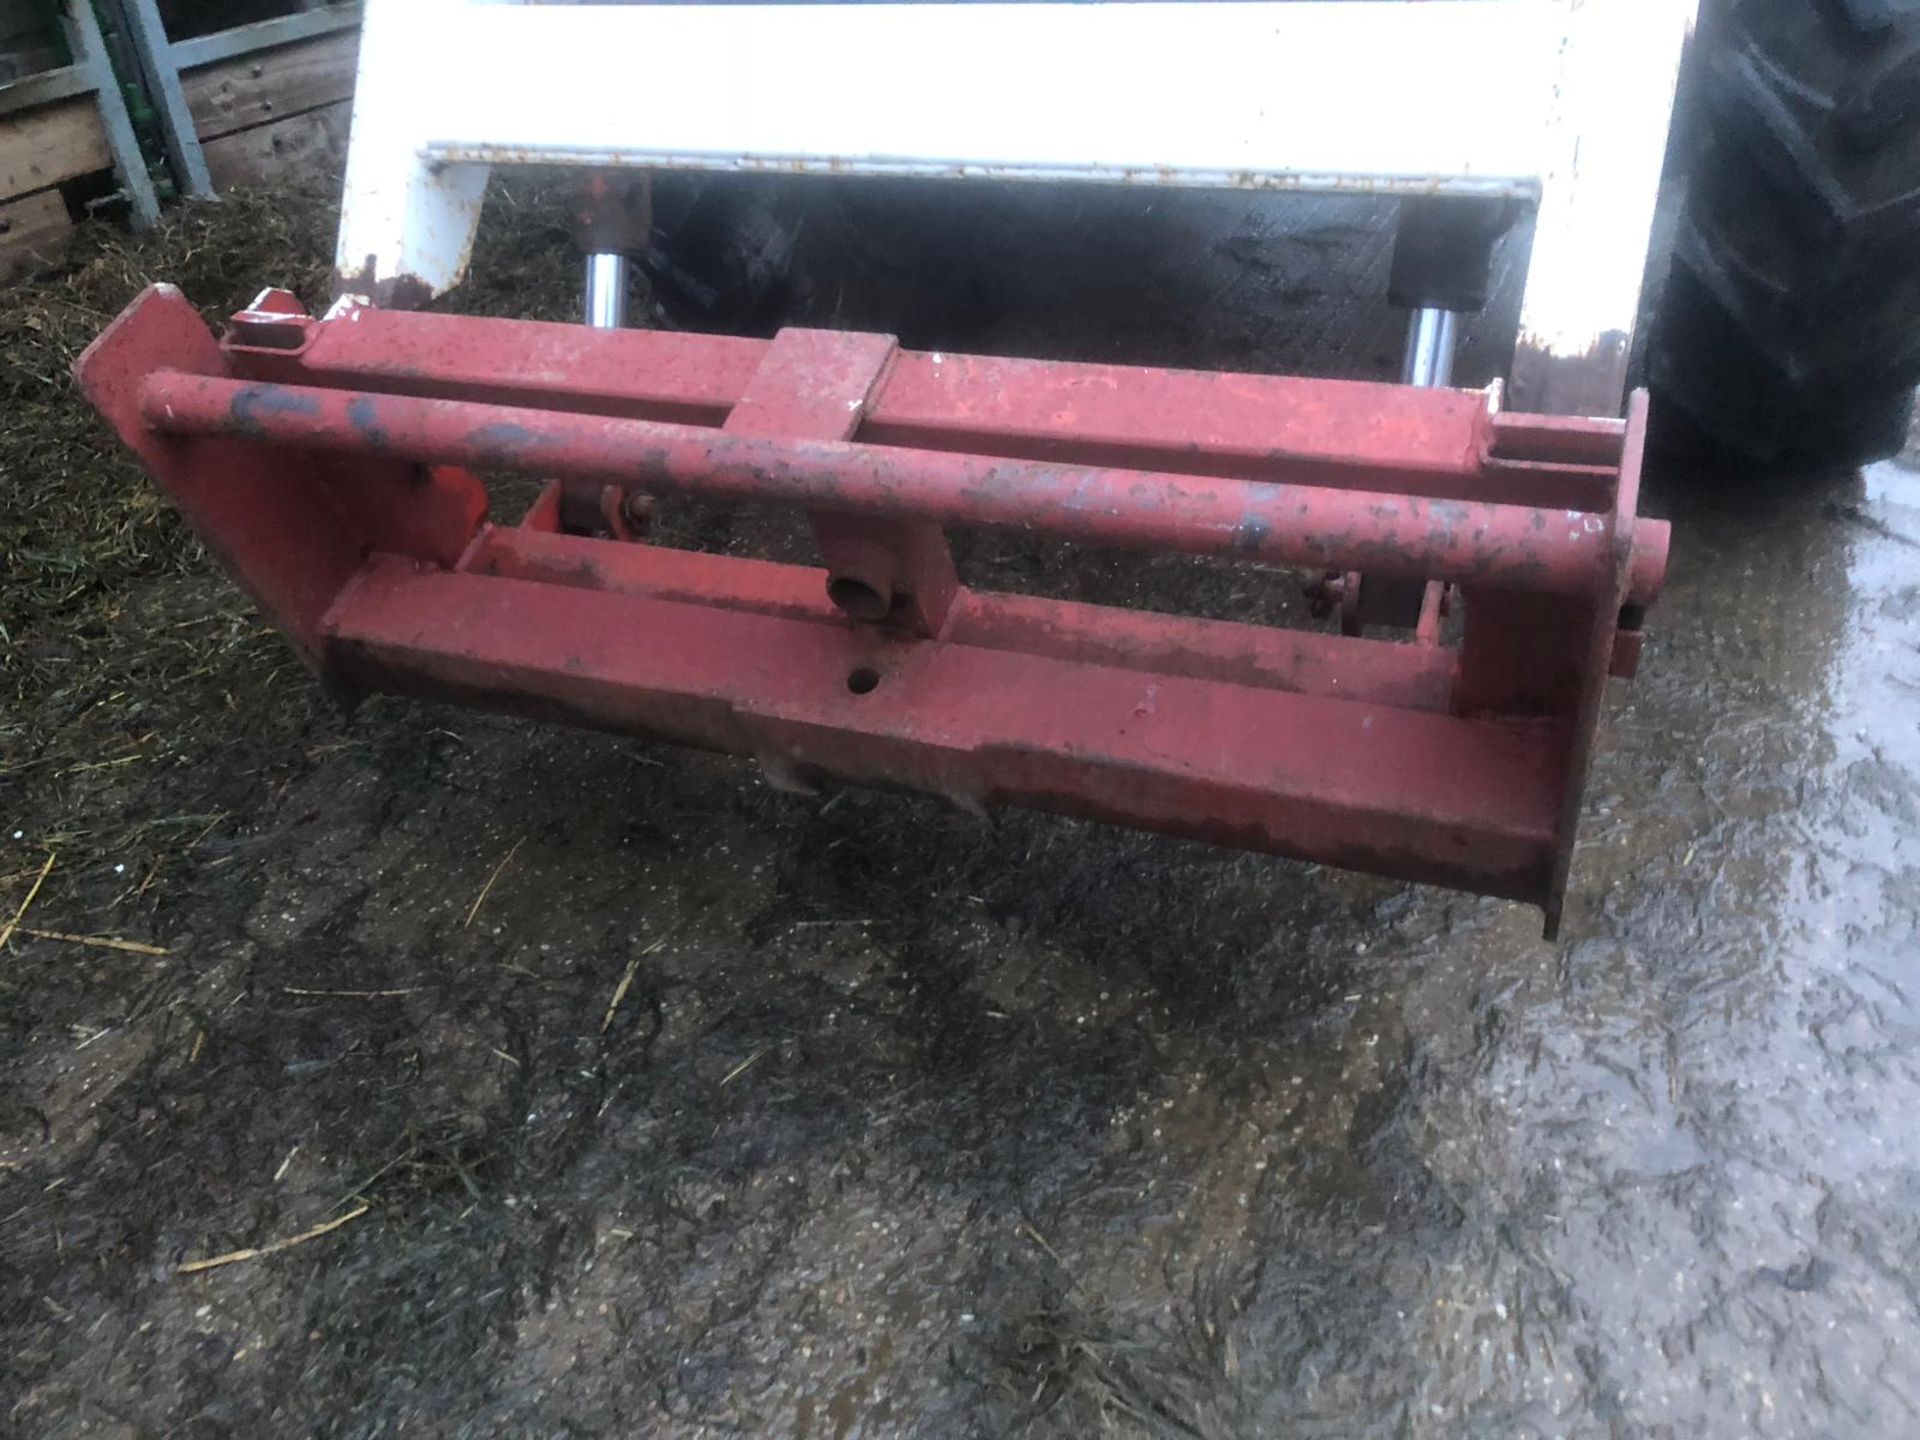 1984 DAVID BROWN CASE 4WD TRACTOR, PTO, 3 POINT LINKAGE, 2 SPOOL VALVES *PLUS VAT* - Image 8 of 16